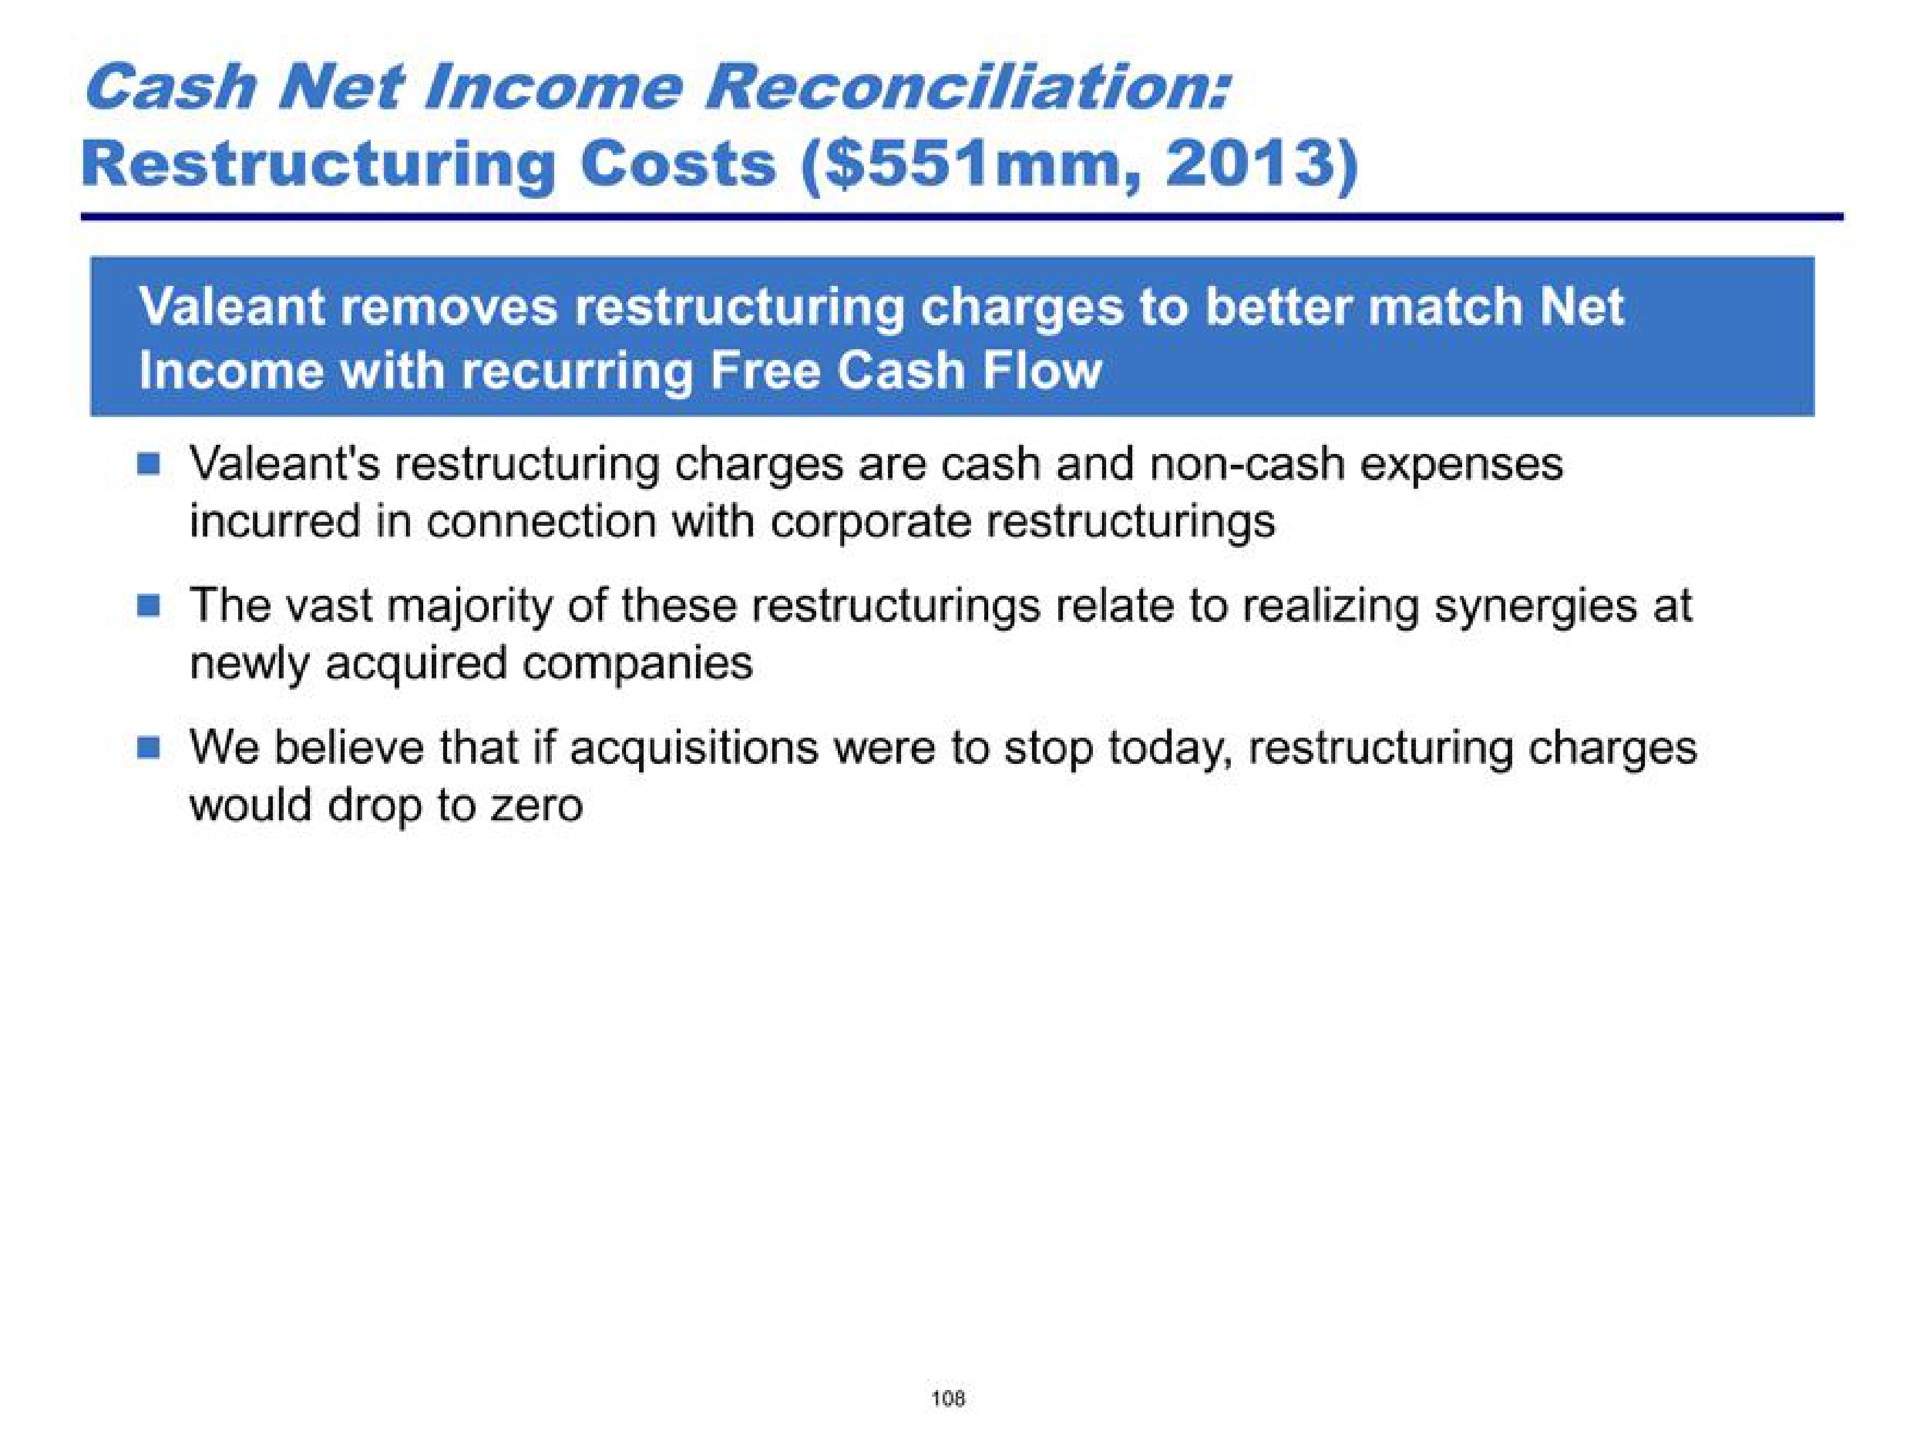 cash net income reconciliation costs | Pershing Square